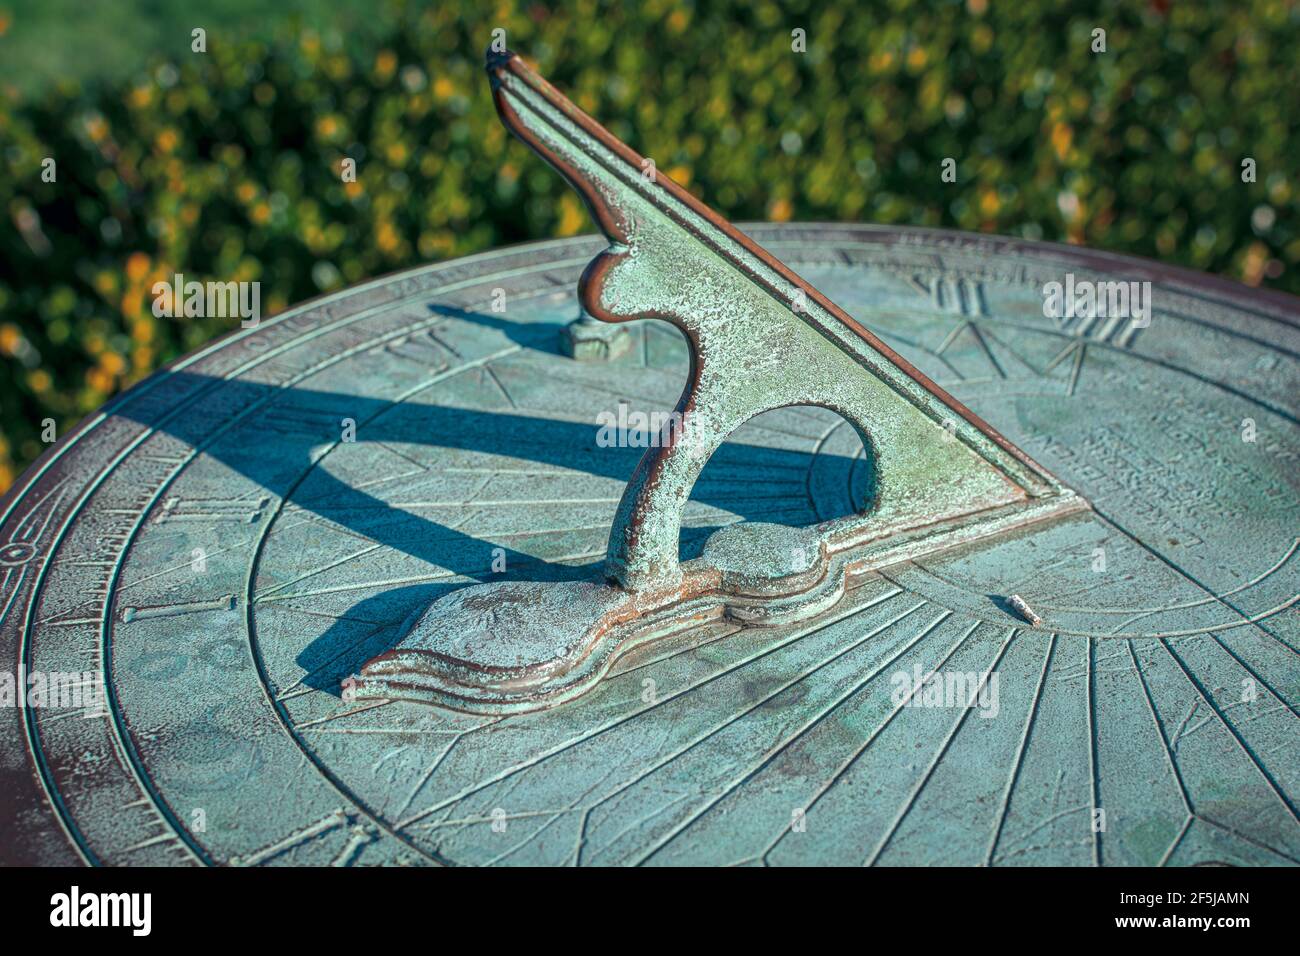 A vintage sundial with an aging patina throws a long shadow, tracking the motion of the sun while telling the time of day. Stock Photo